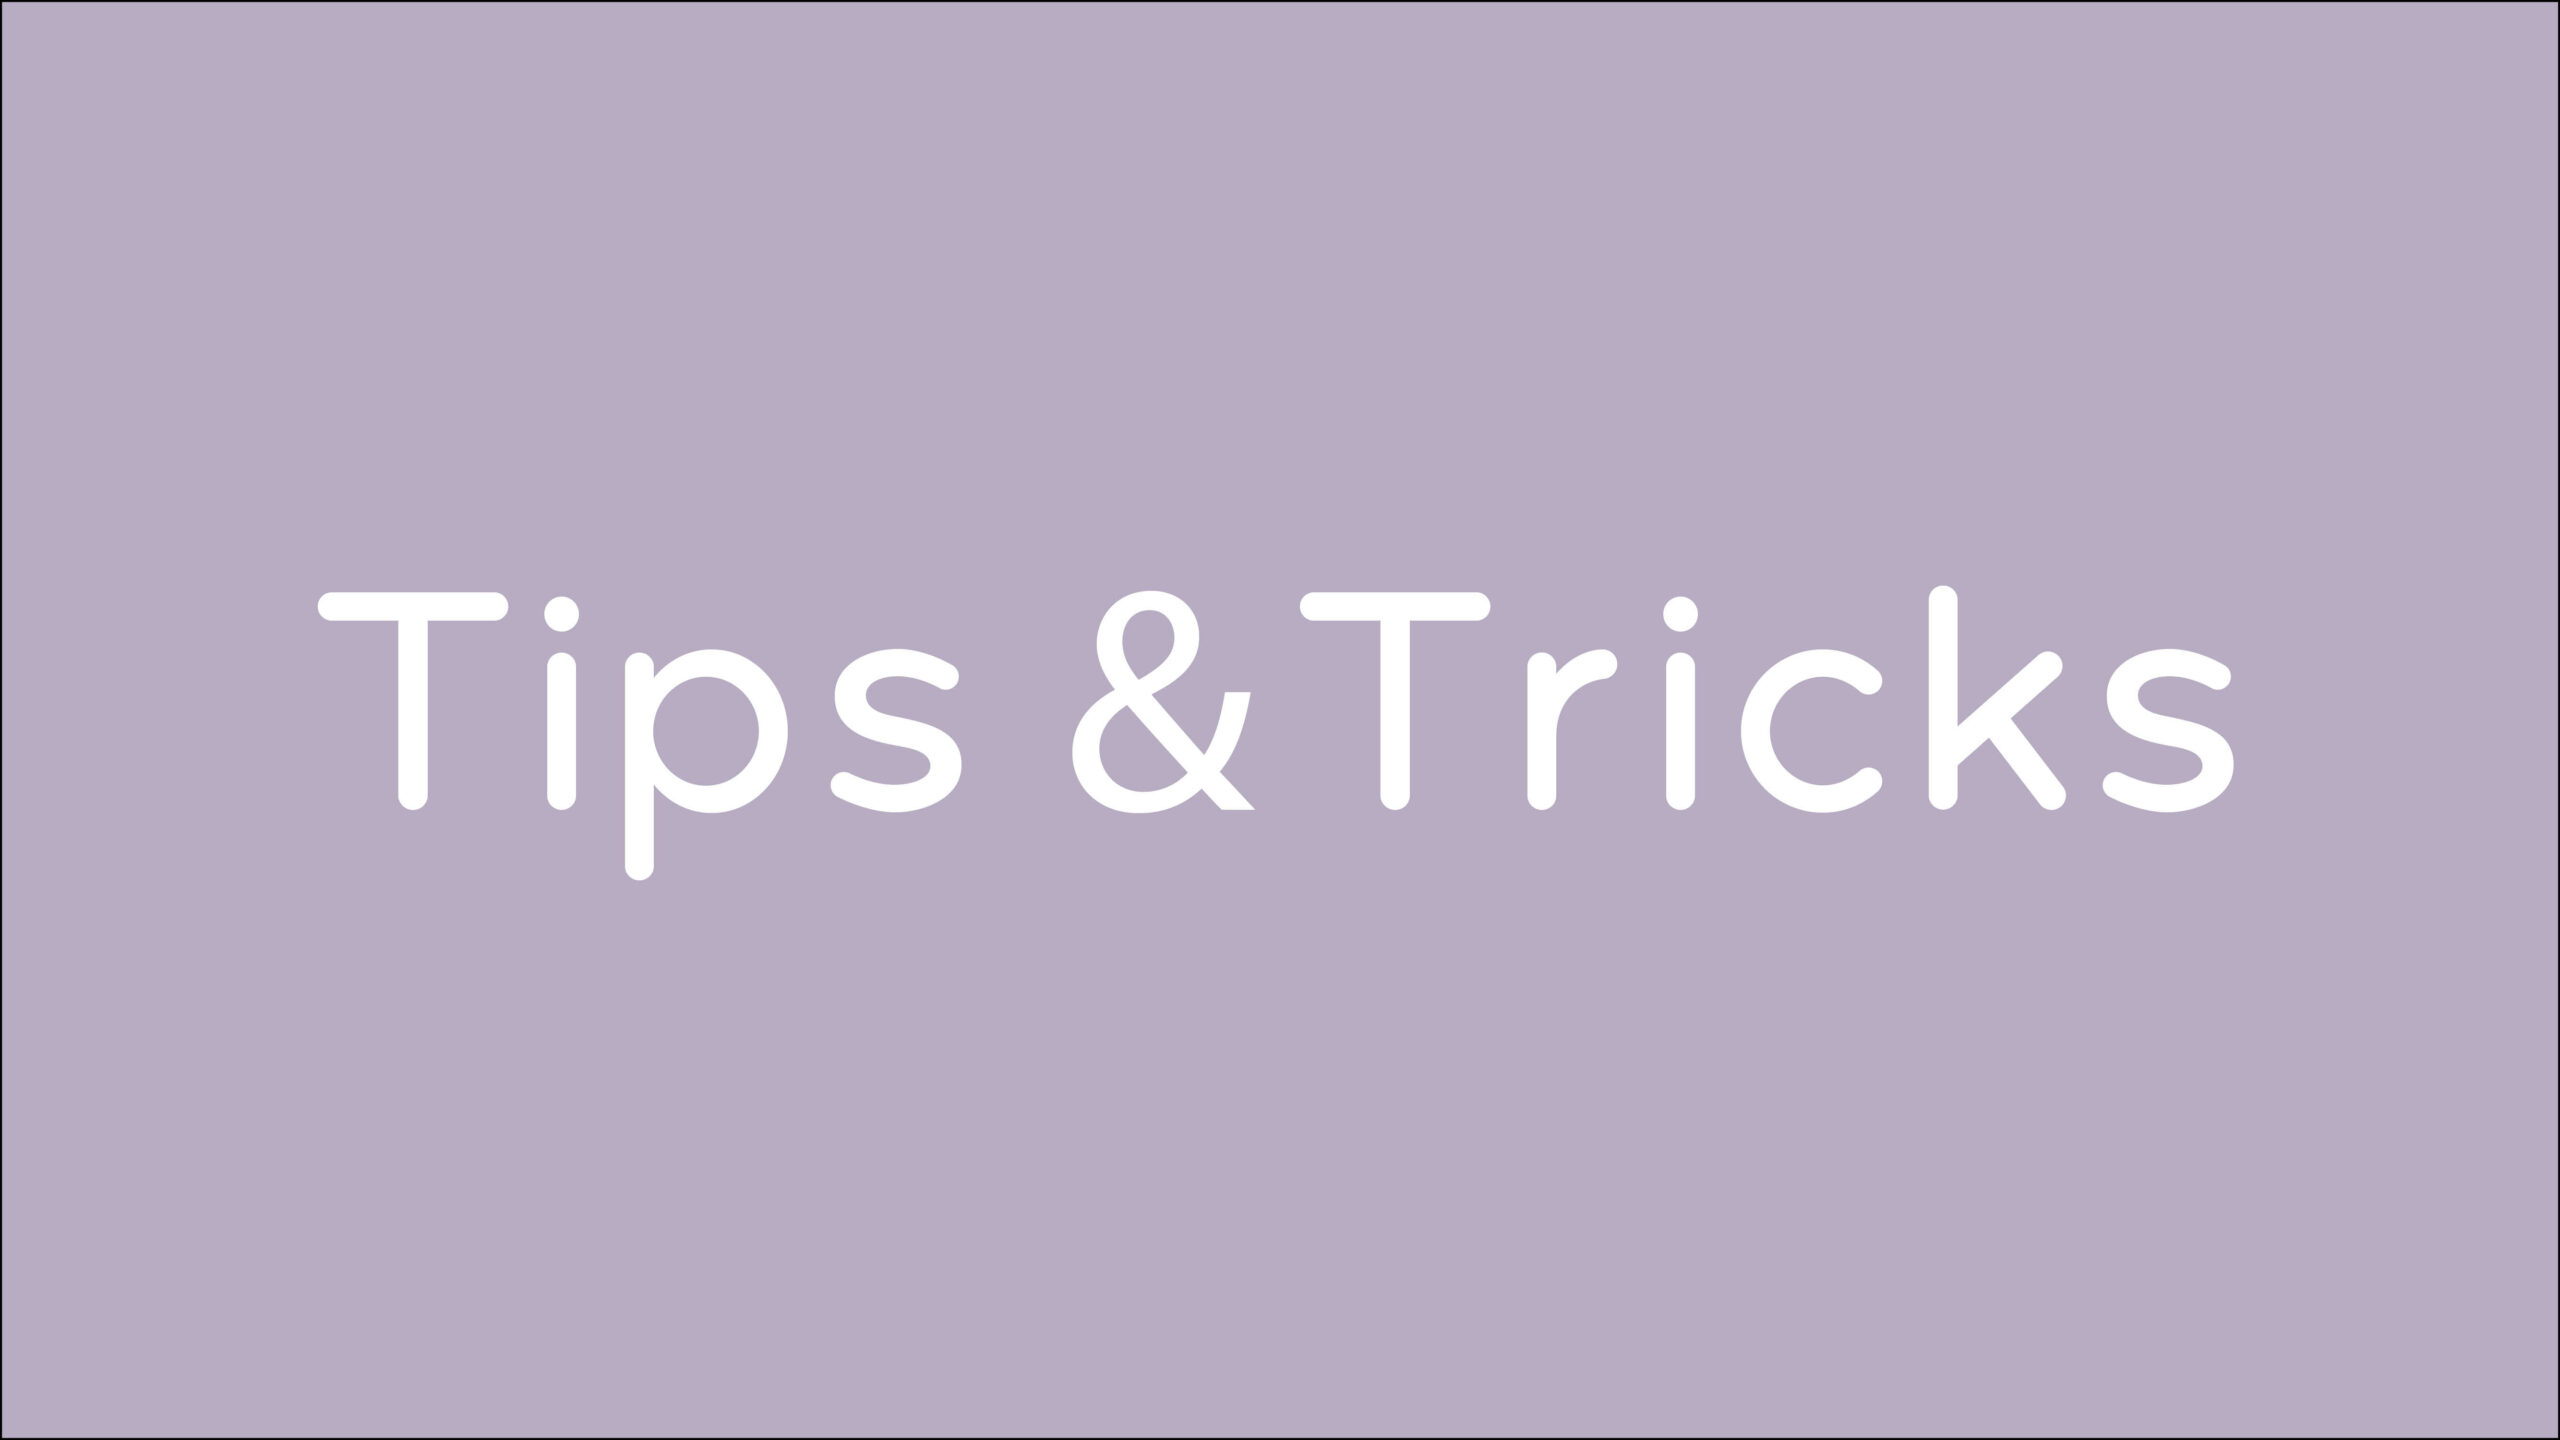 Tips & Tricks Welcome Kit Graphic